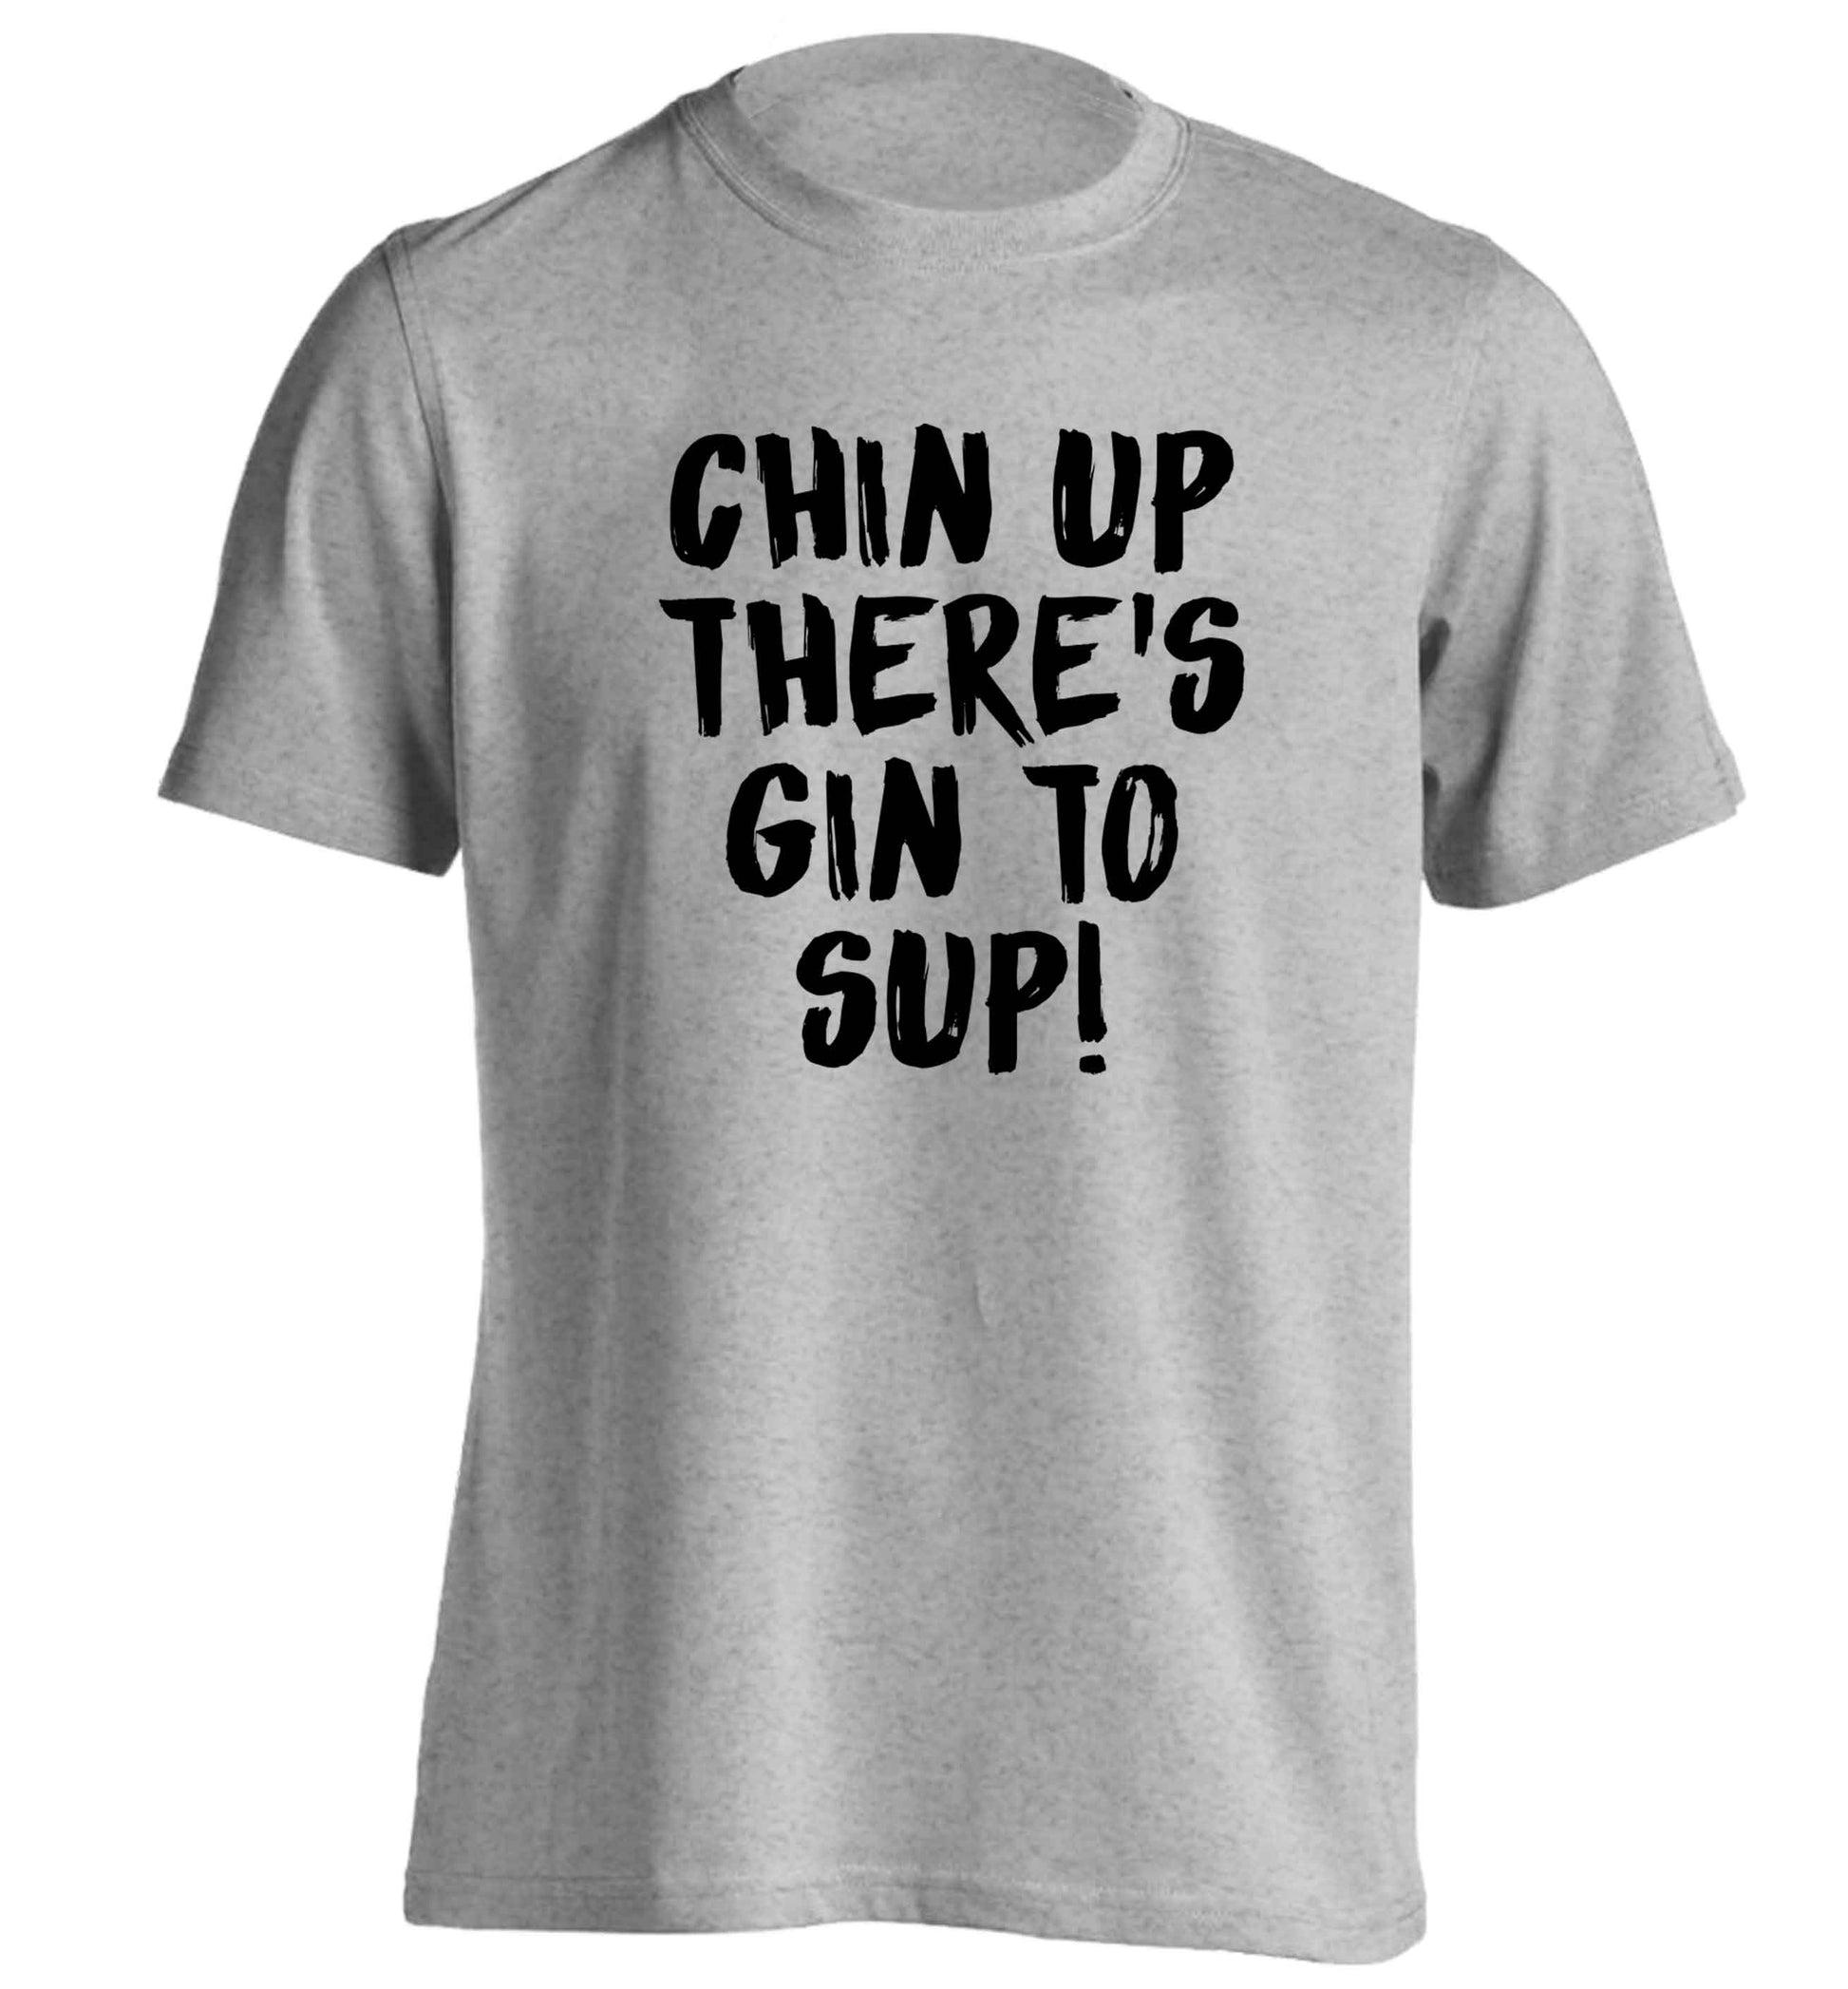 Chin up there's gin to sup adults unisex grey Tshirt 2XL